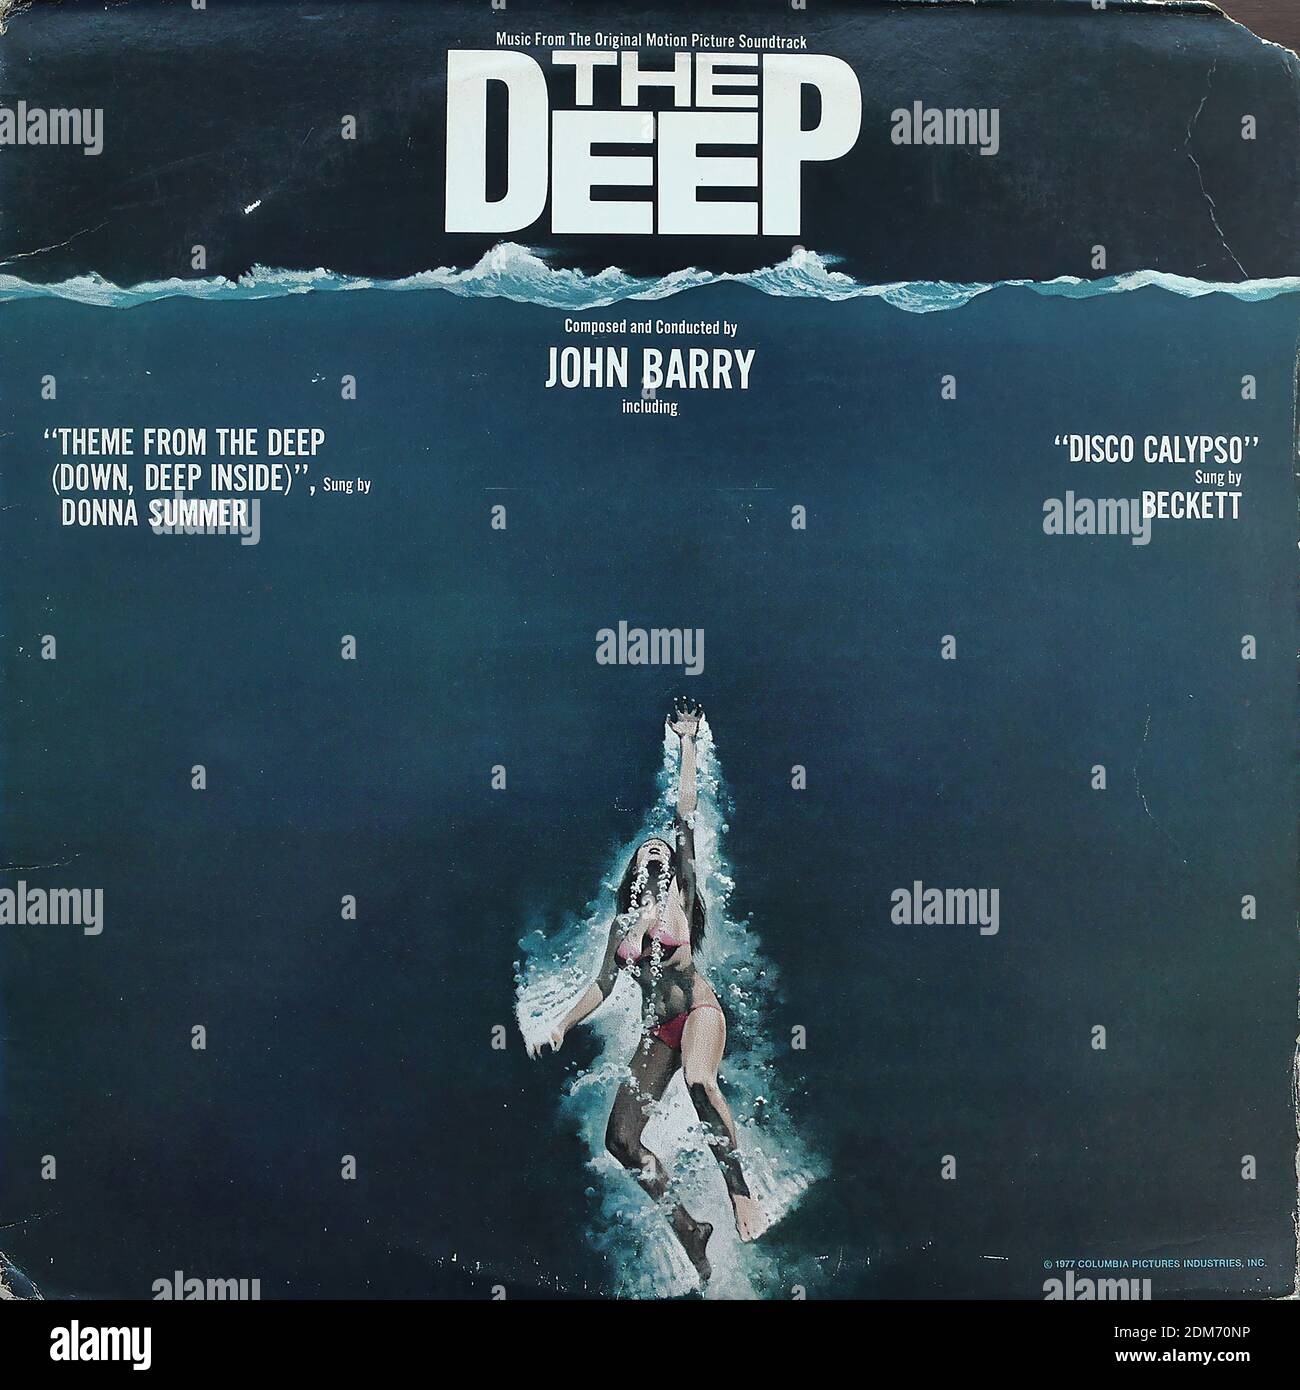 The Deep - Music from the Original Motion Picture Soundtrack - Donna Summer - Down, Deep Inside & Beckett - Disco Calypso, John Barry Composer & Conductor, Vogue Columbia CBLA. - Vintage vinyl album cover Stock Photo